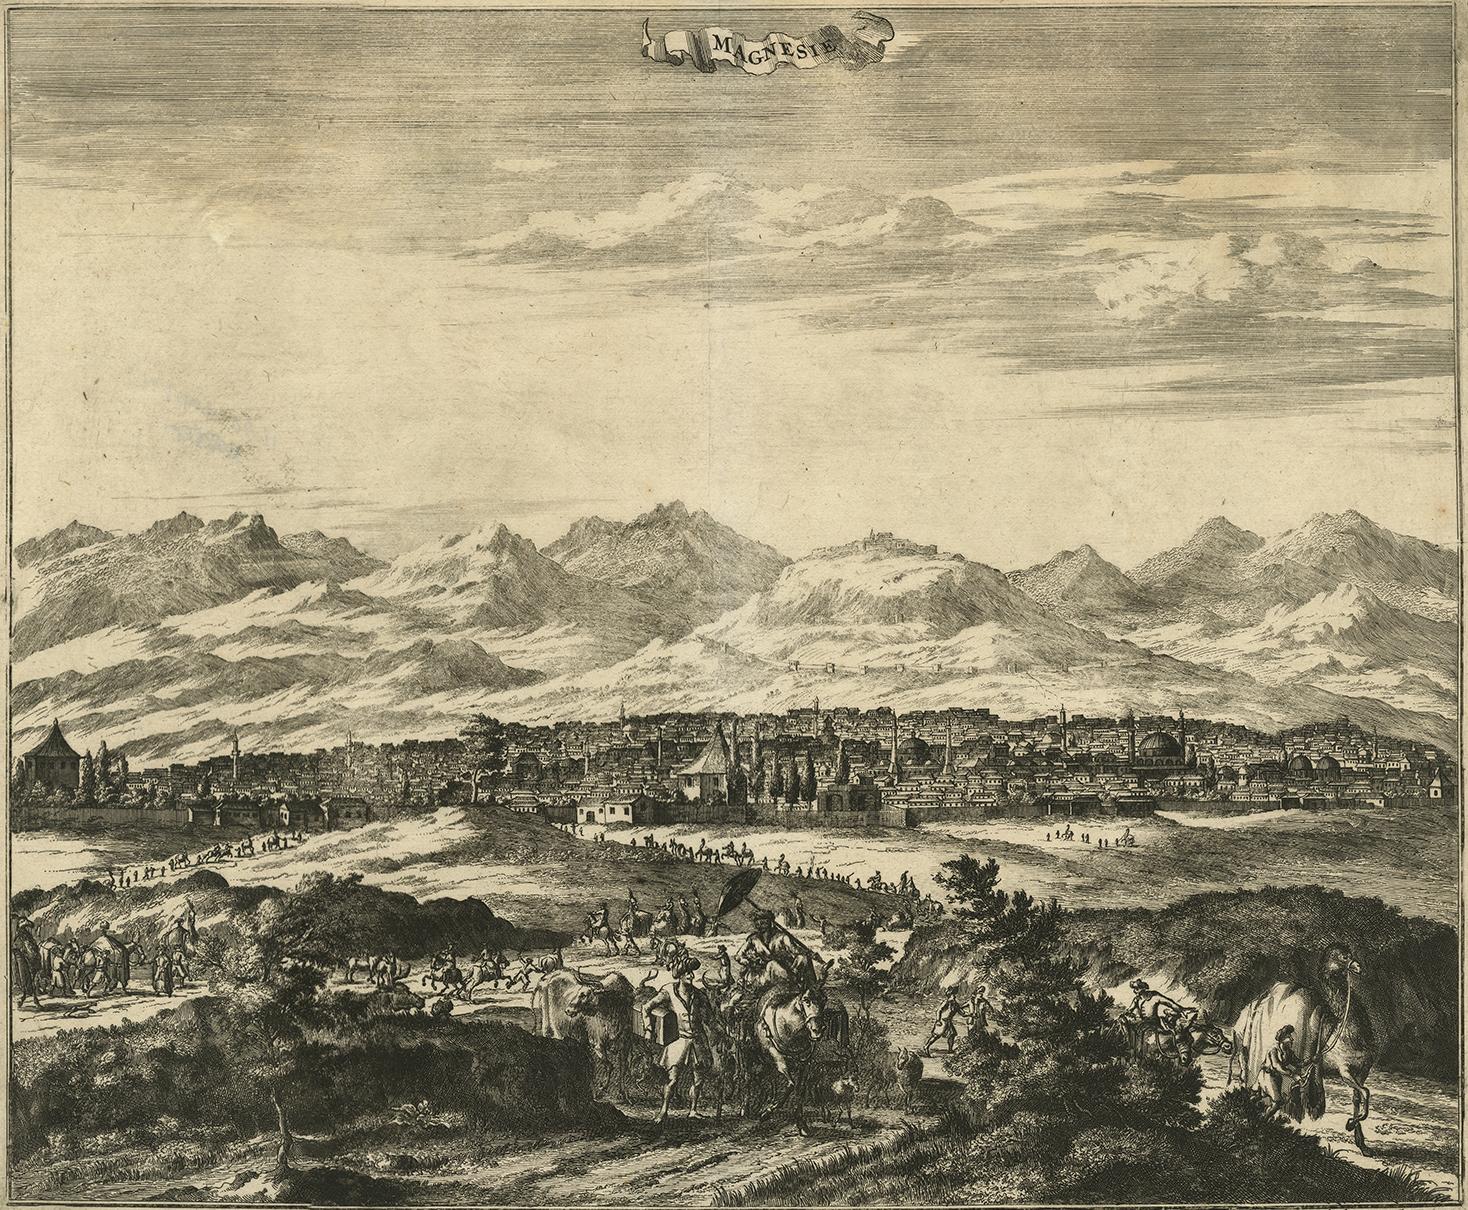 An attractive view of the Turkish town of Magnesie with figures in local dress, camels and other animals in the foreground, all flocking to the town, with the city and its clearly identifiable domed mosques beyond. This copperplate view was first